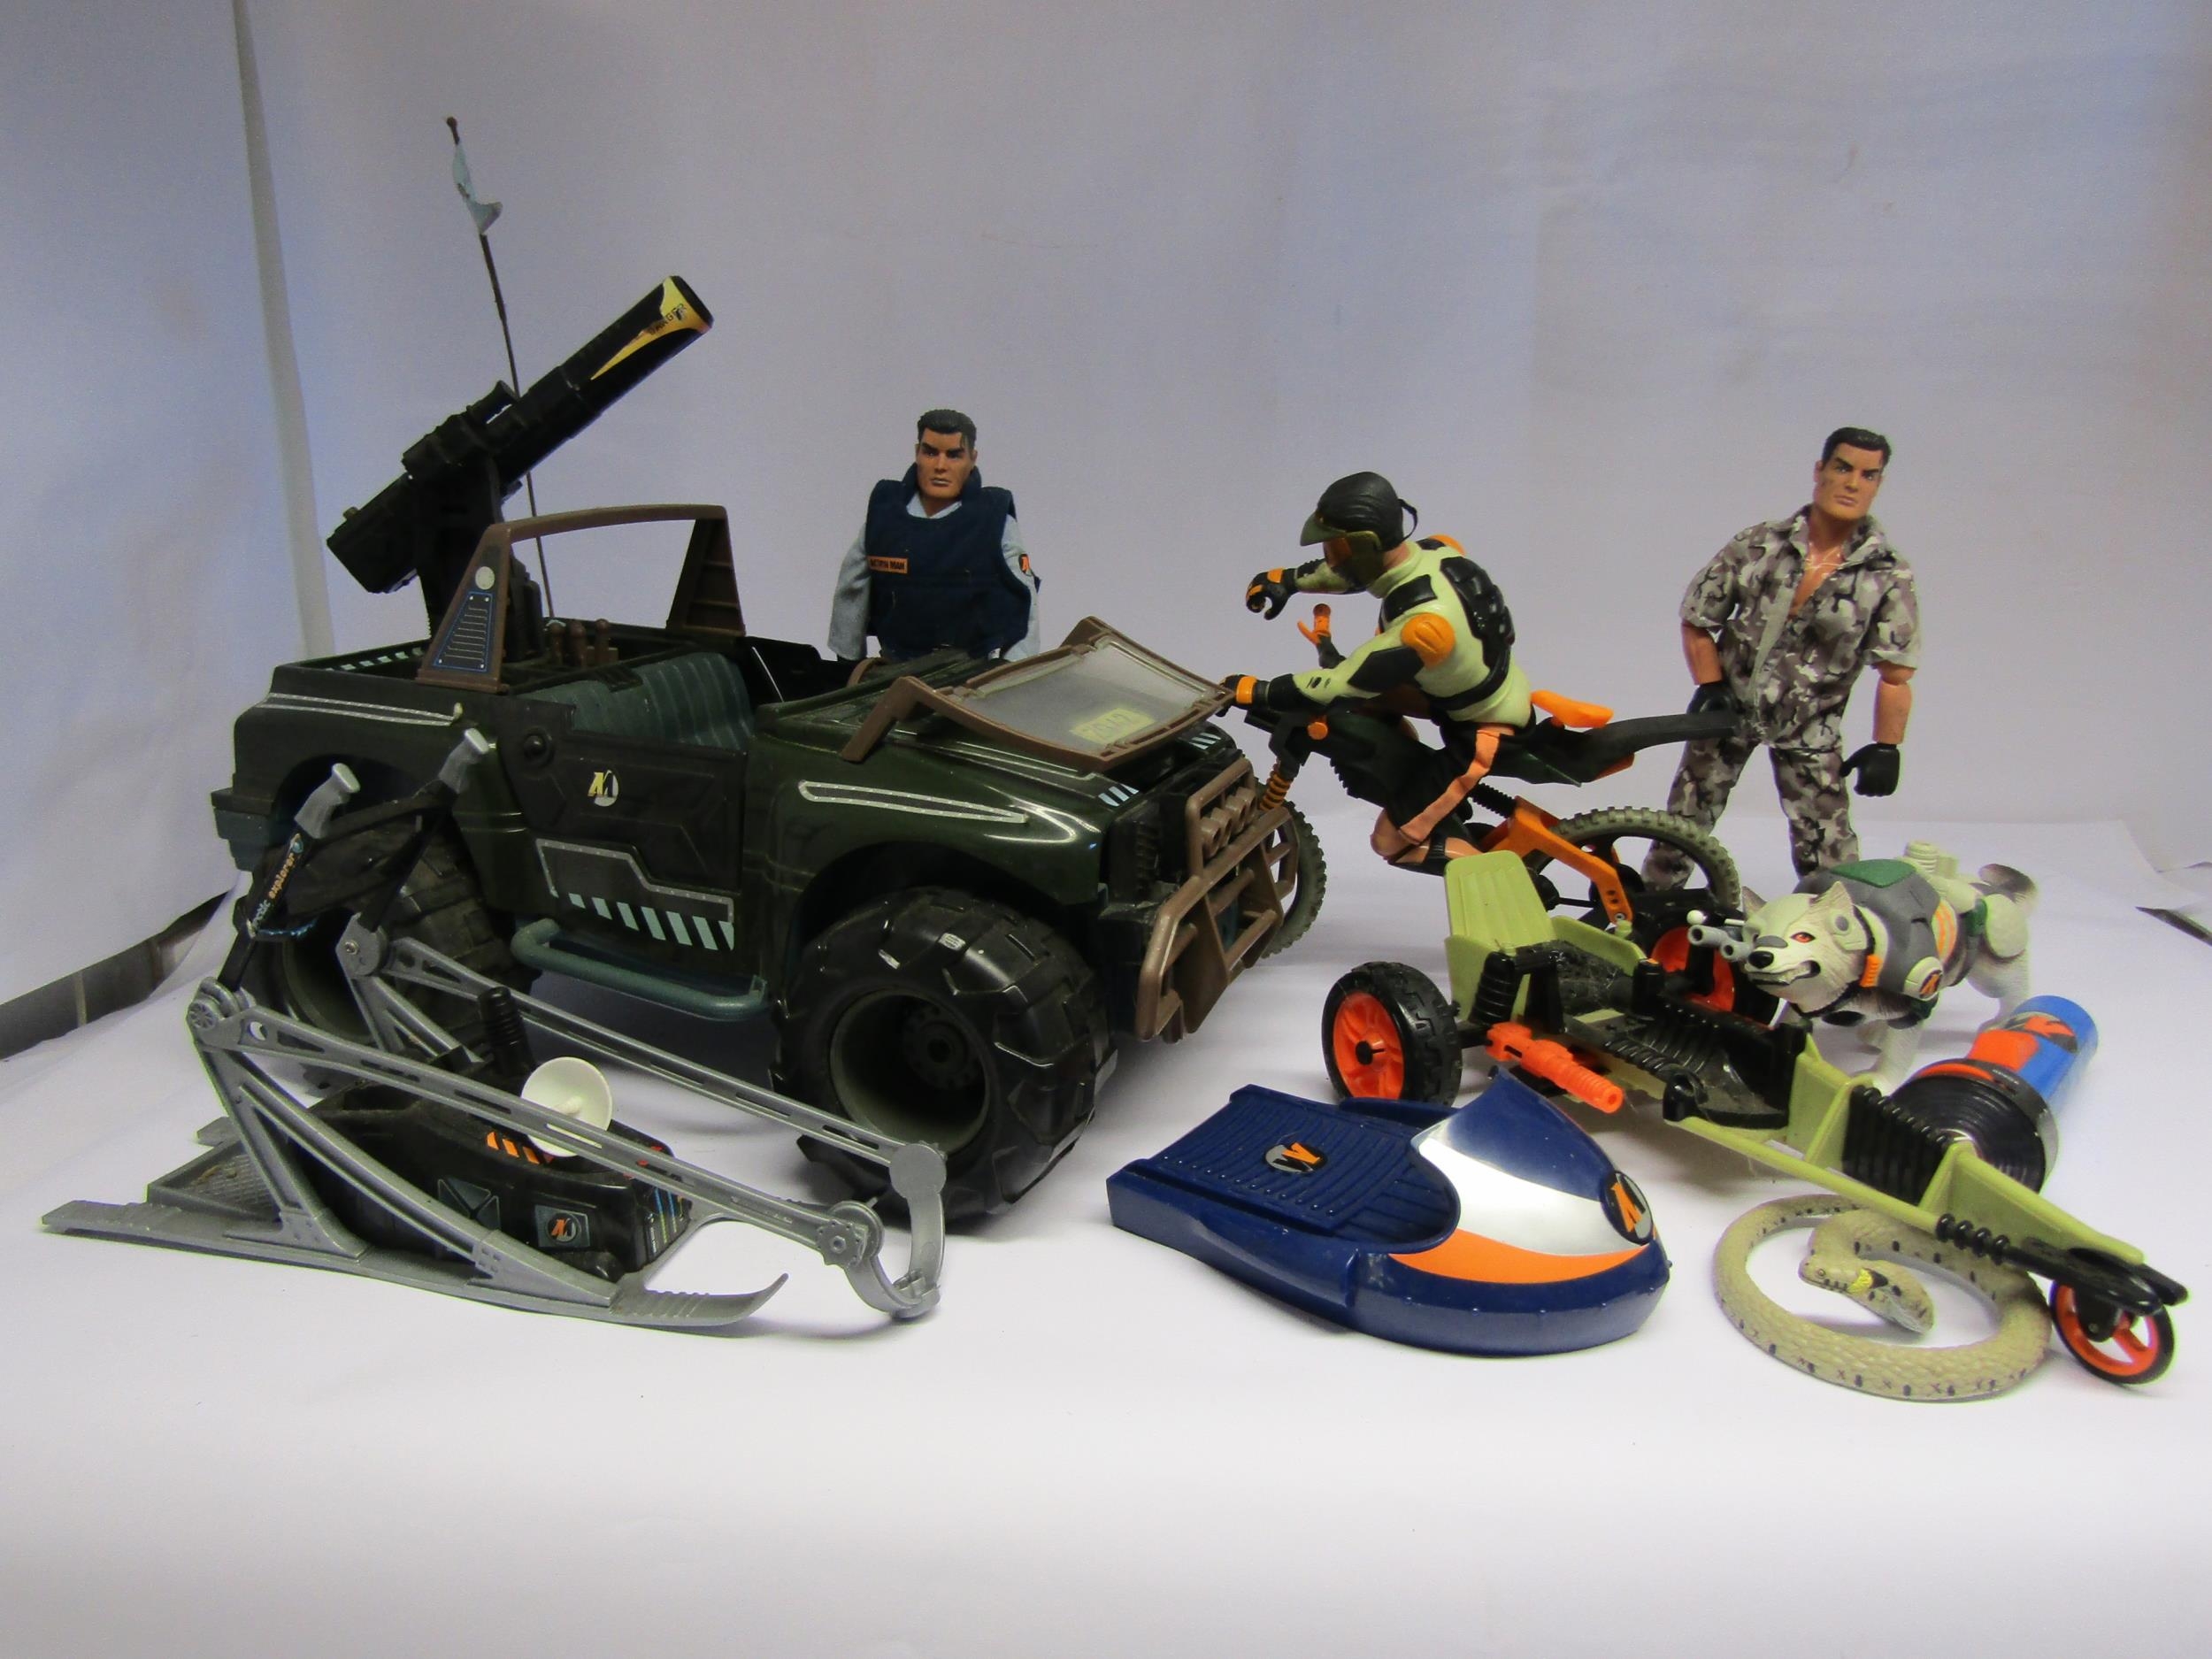 A collection of 1990's Action Man figures, vehicles, outfits, weapons and accessories